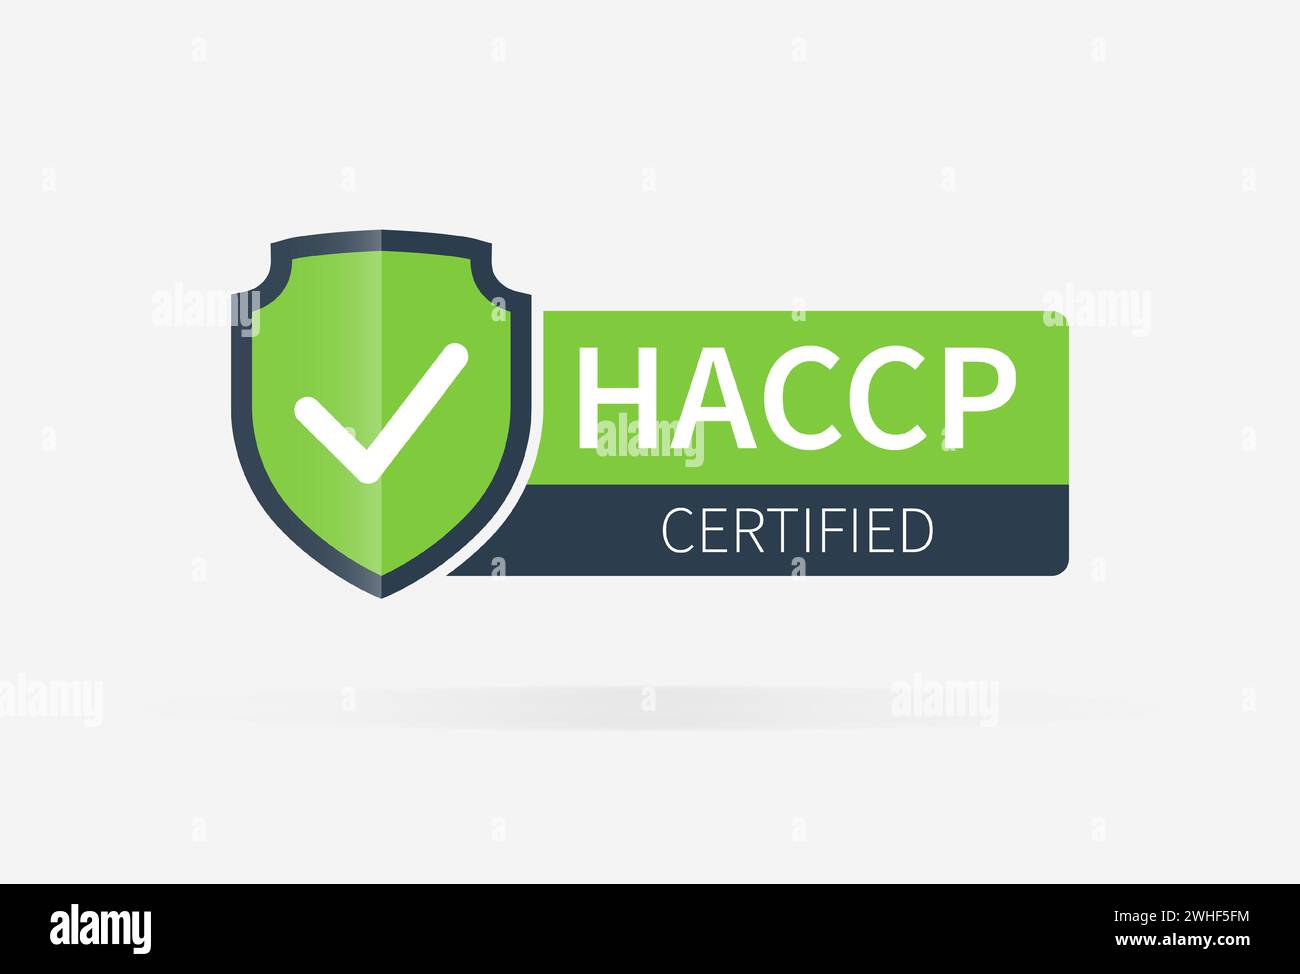 HACCP, Hazard Analysis Critical Control Points of Certified Stempelsymbol Stock Vektor